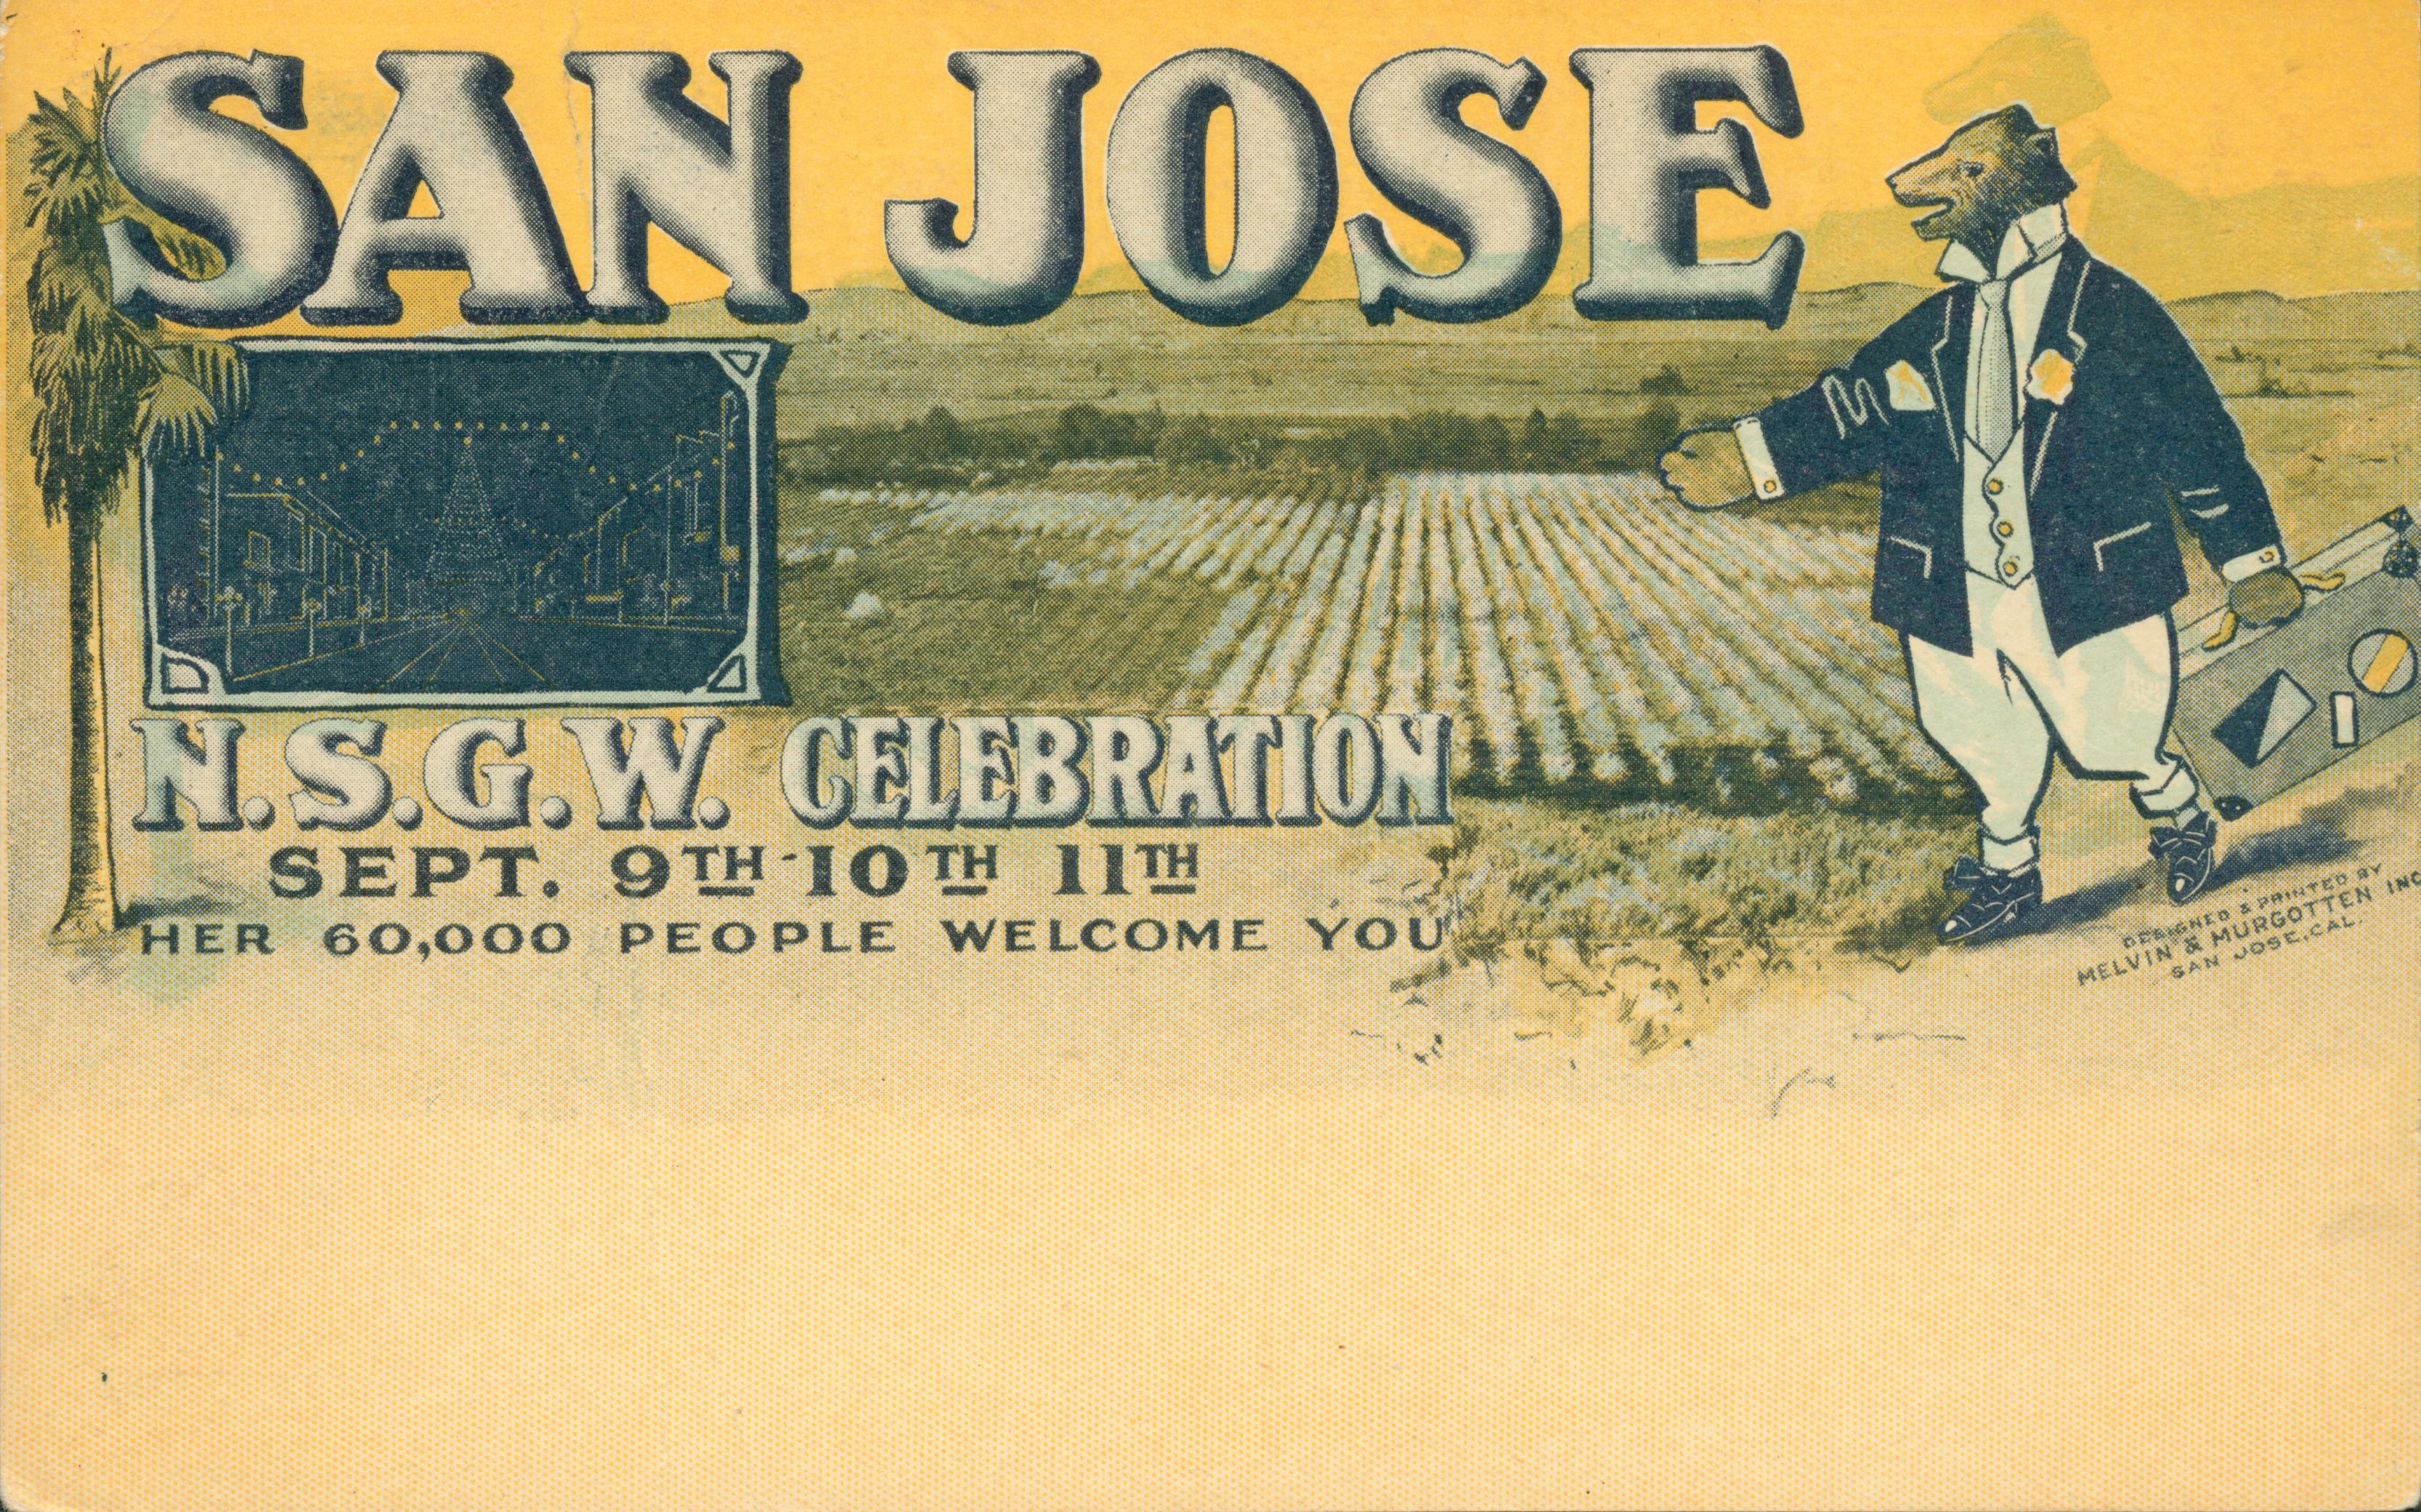 Artist's color rendition  of the San Jose N.S.G.W. Celebration includes a palm tree and bear dressed in formal suit carrying a suitcase.  Inset photo of city street with Electric Light Tower